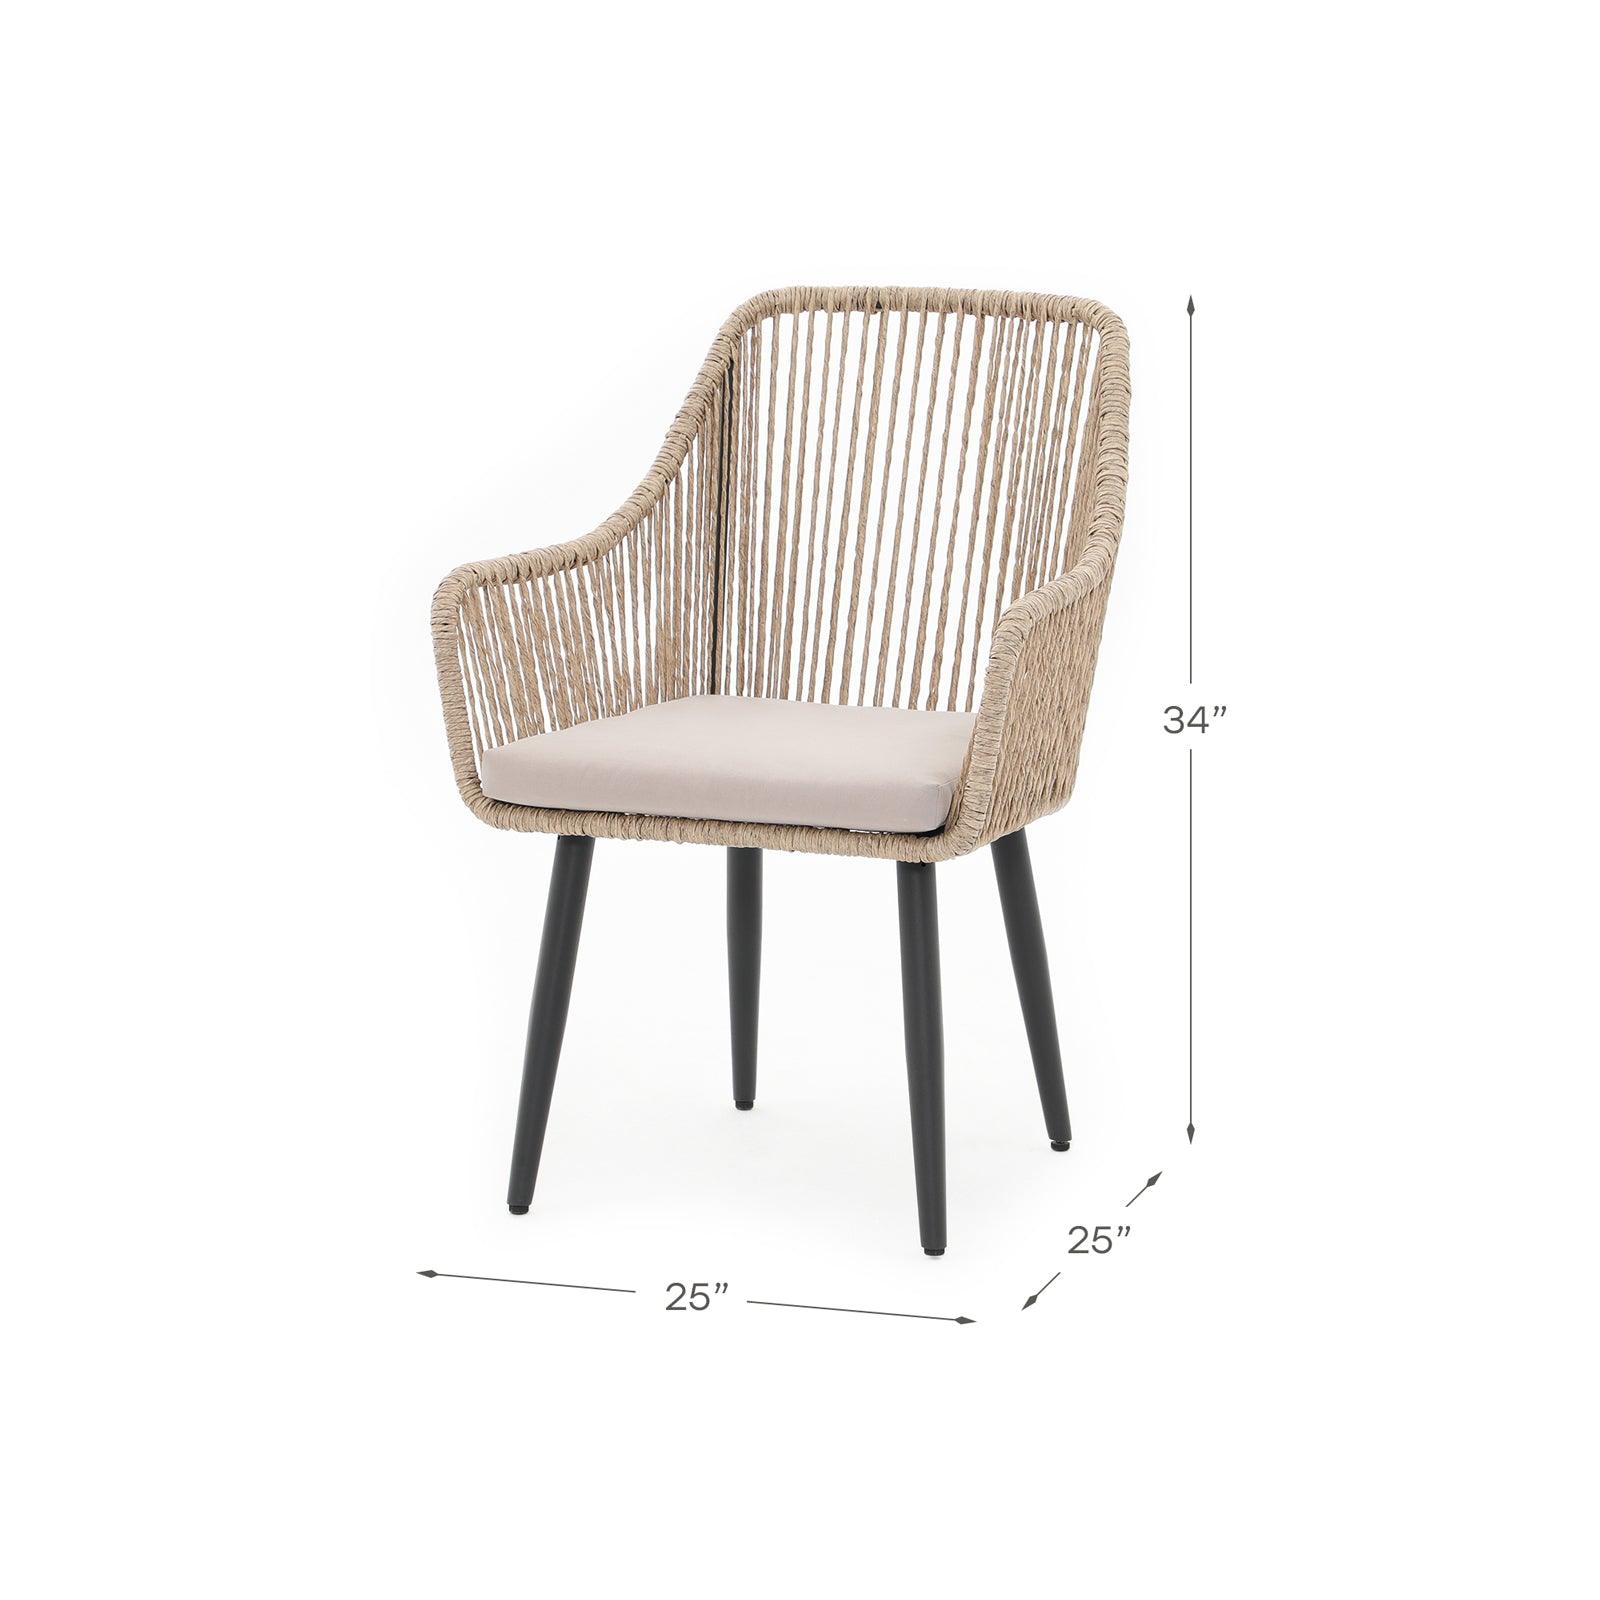 Hallerbos Outdoor Dining Chair with steel frame, natural twisted rattan design, beige cushion, dimension info- Jardina Furniture#Color_Natural